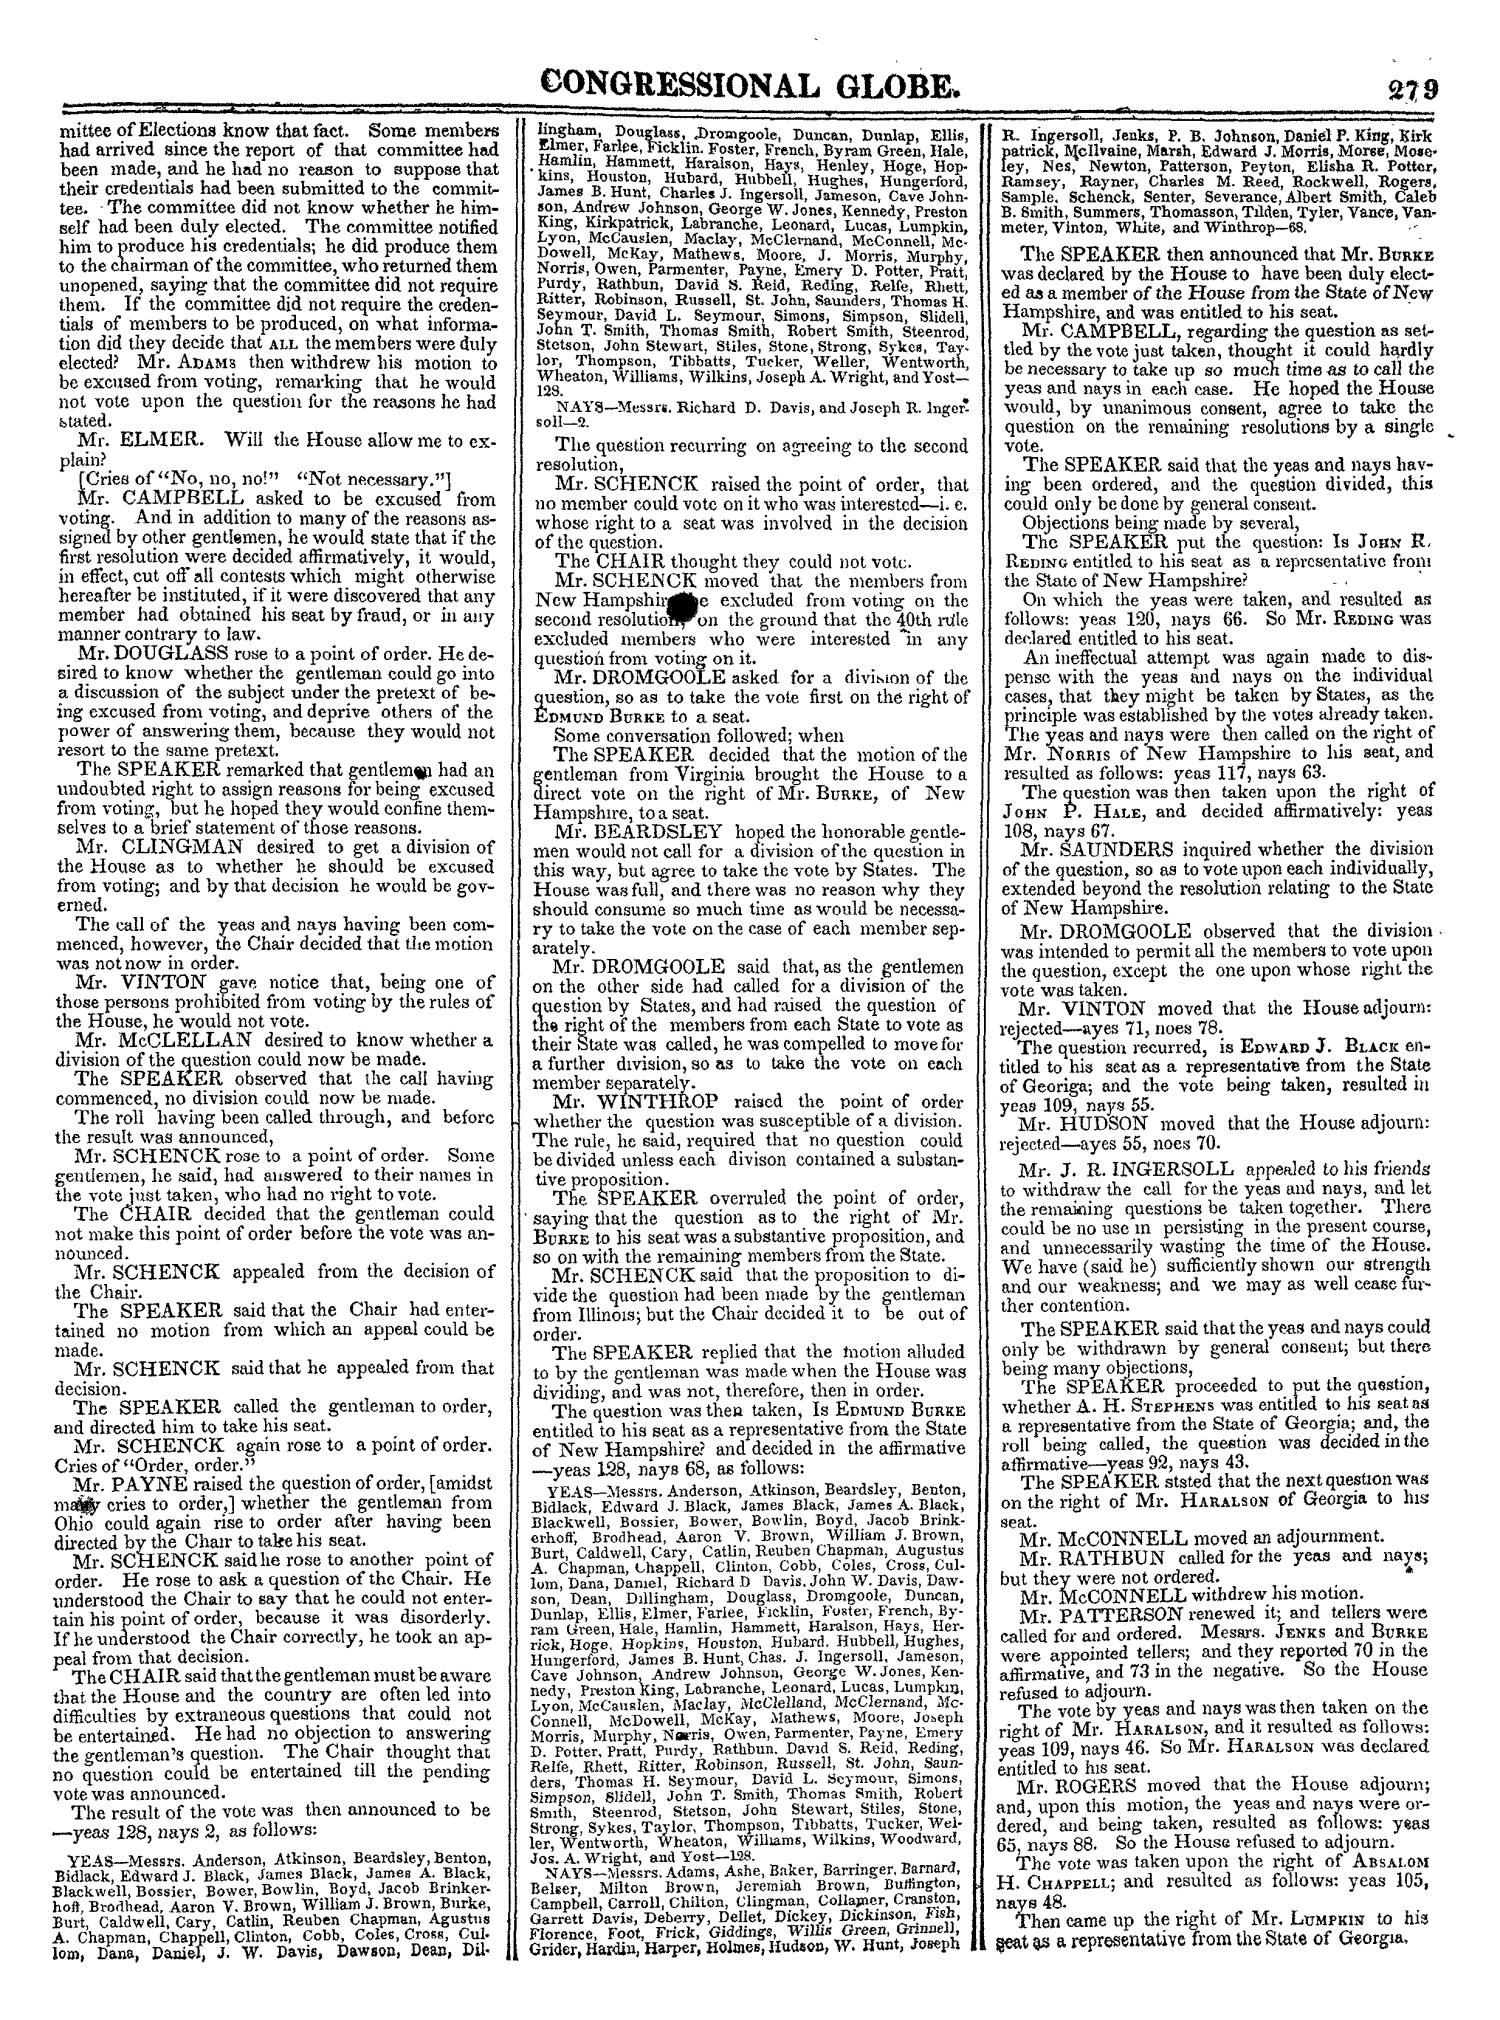 The Congressional Globe, Volume 13, Part 1: Twenty-Eighth Congress, First Session
                                                
                                                    279
                                                